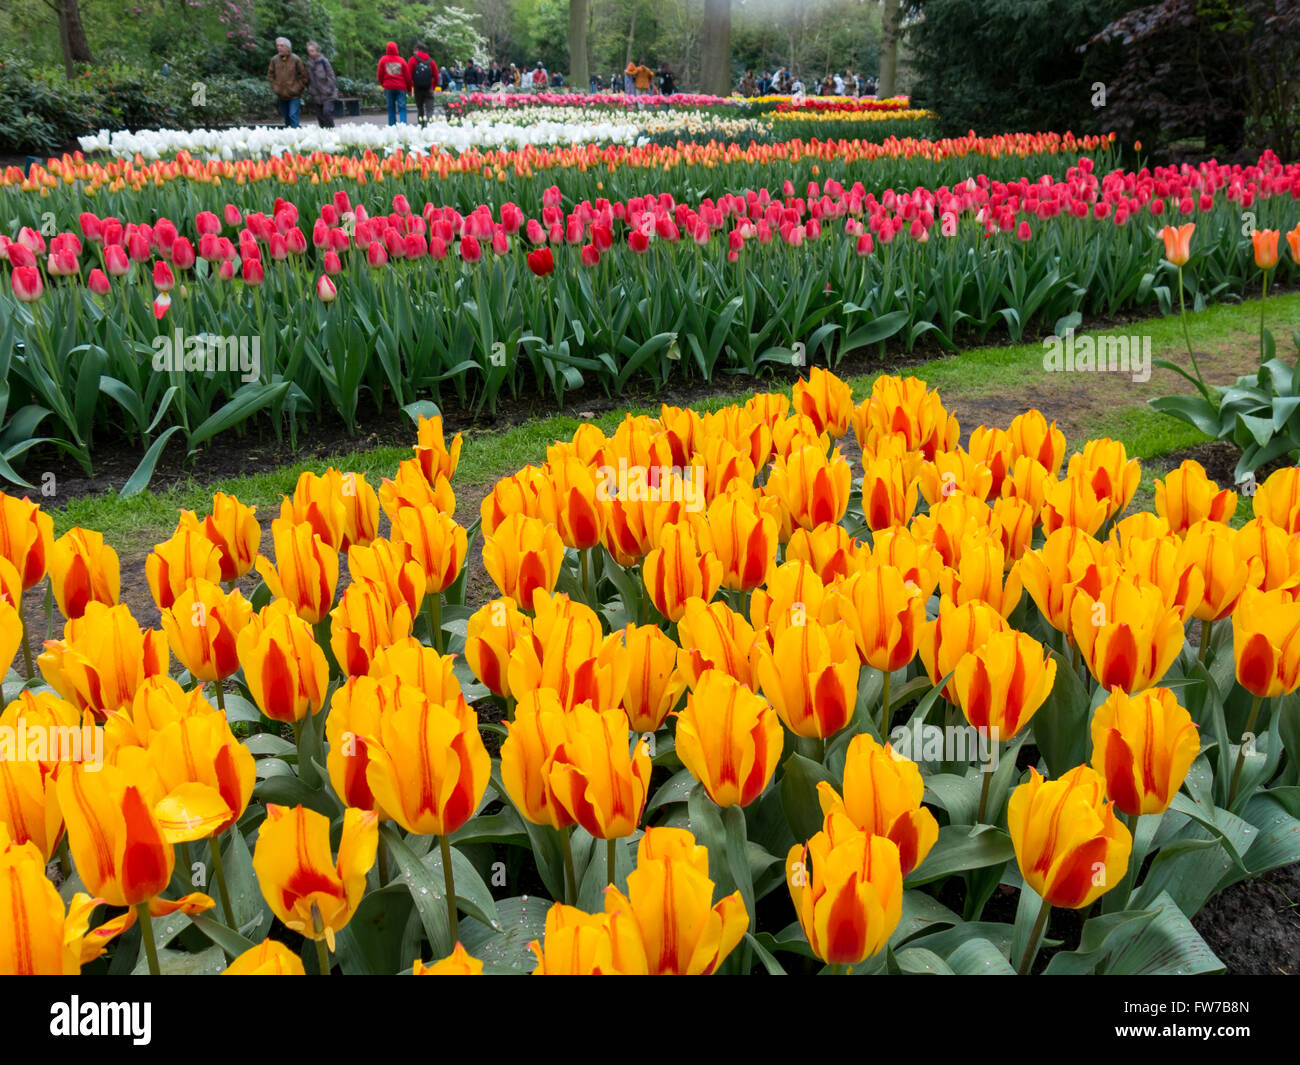 Beds of tulips in orange, red and white in Keukenhof Park, the Garden of Europe in Lisse, South Holland, Netherlands Stock Photo